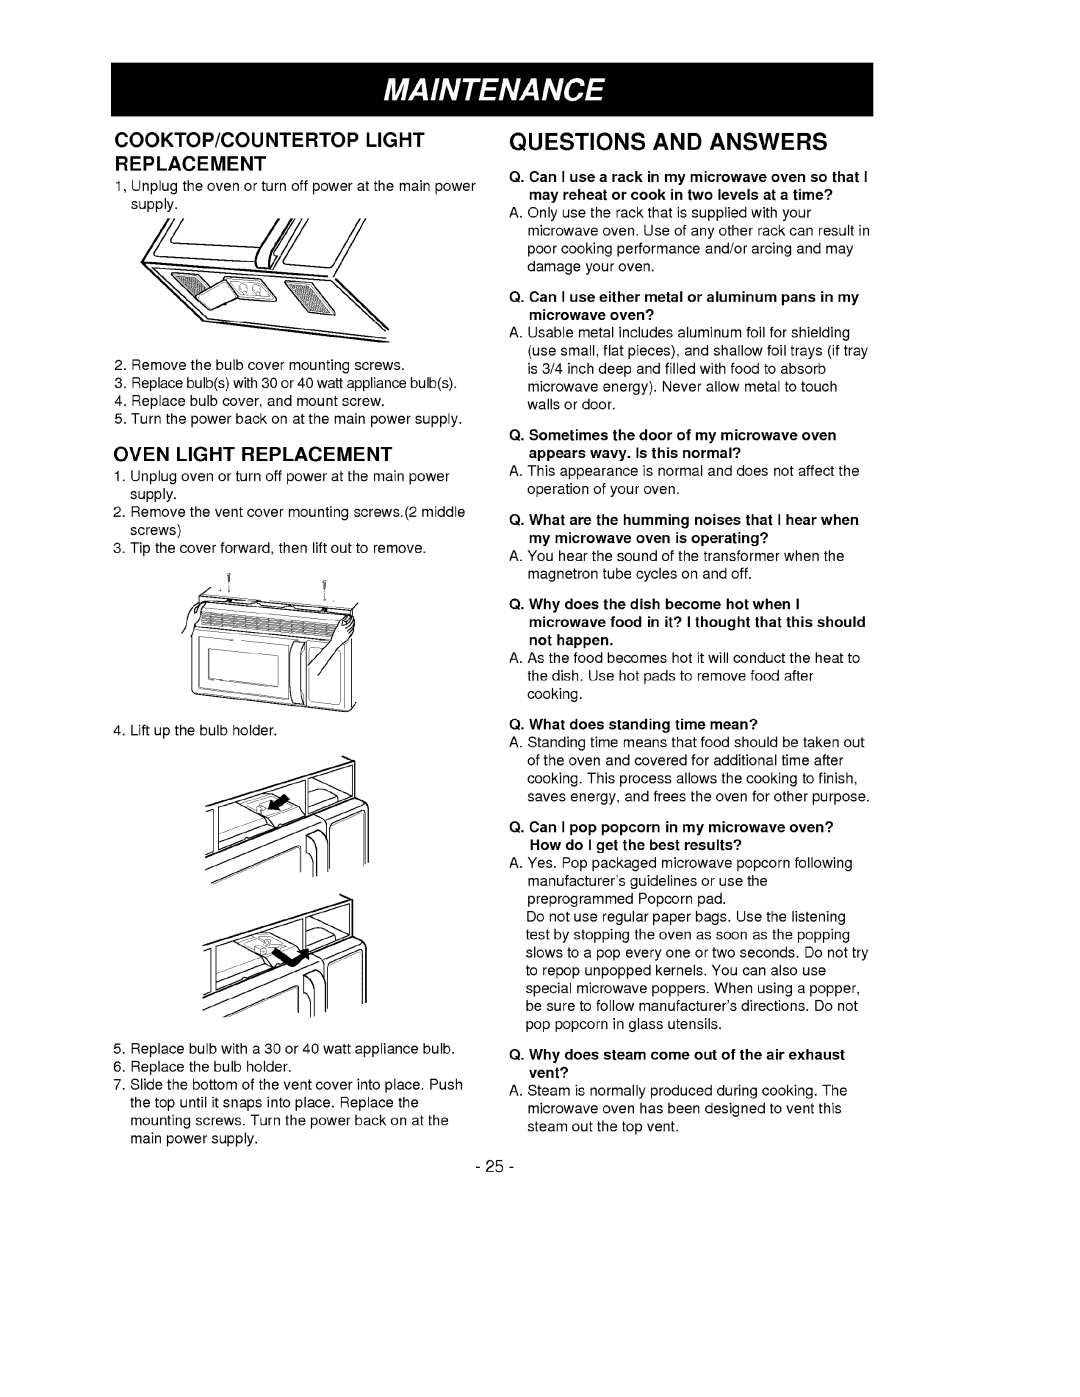 Goldstar MV-1525B, MV-1525W owner manual Questions And Answers, Oven Light Replacement 